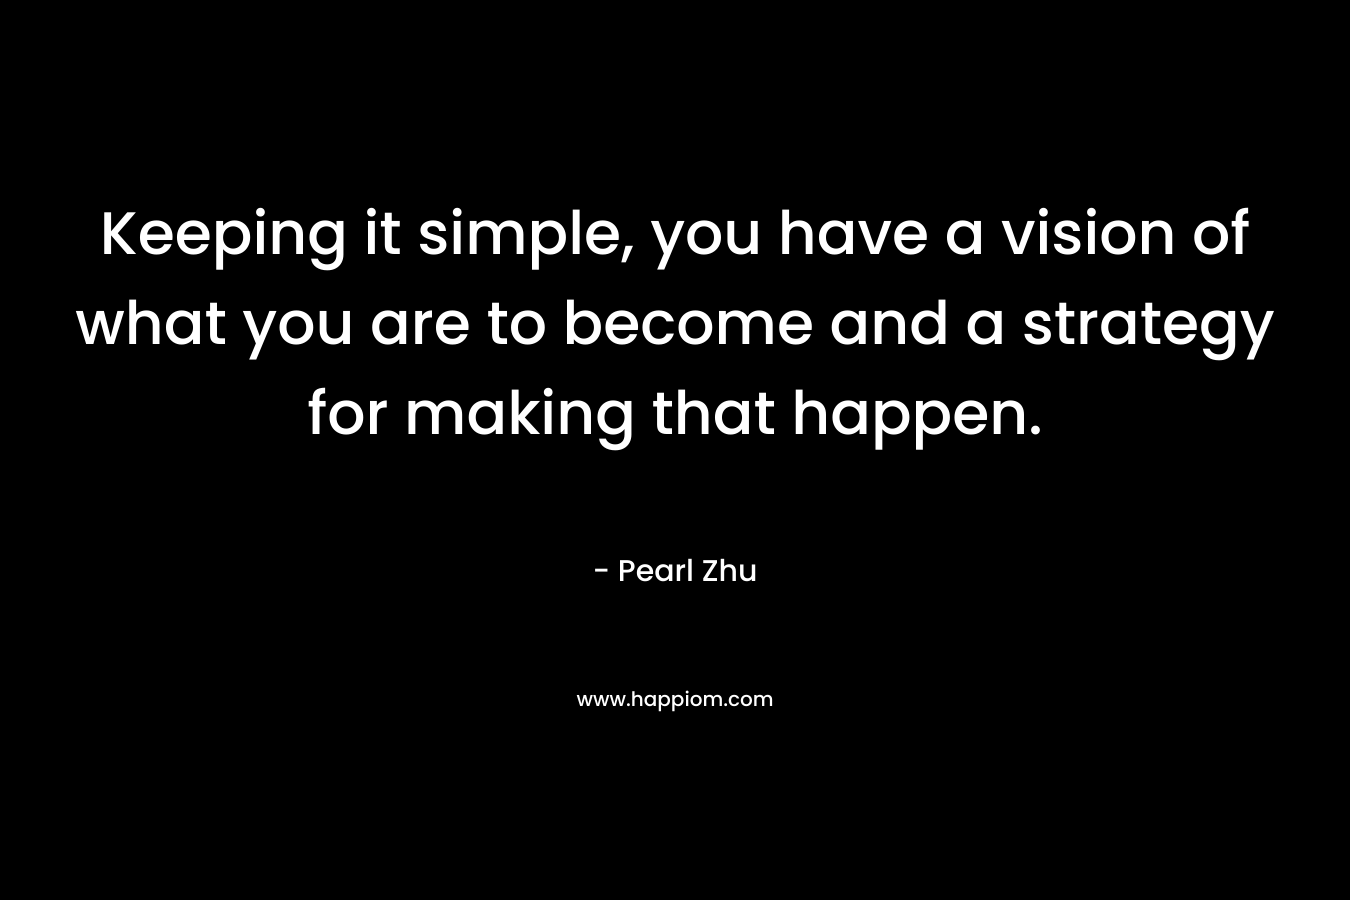 Keeping it simple, you have a vision of what you are to become and a strategy for making that happen. – Pearl Zhu